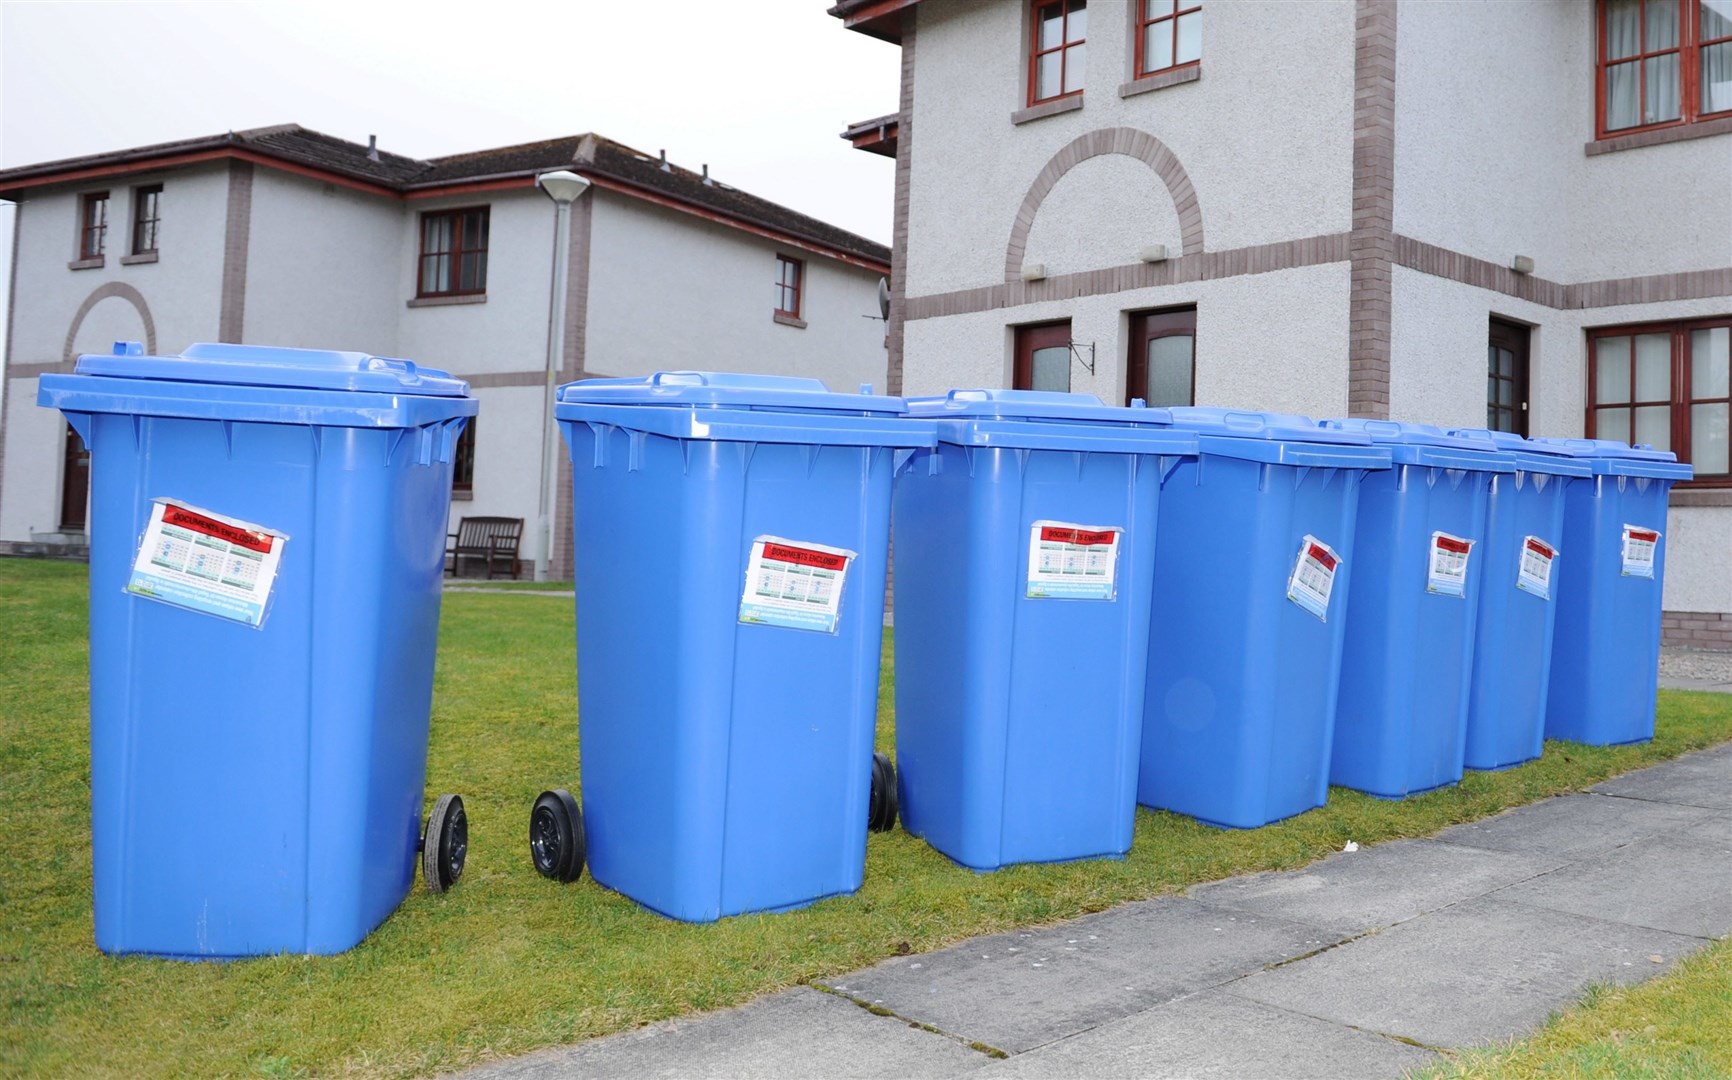 A new recycling service will be rolled out across the Highlands.